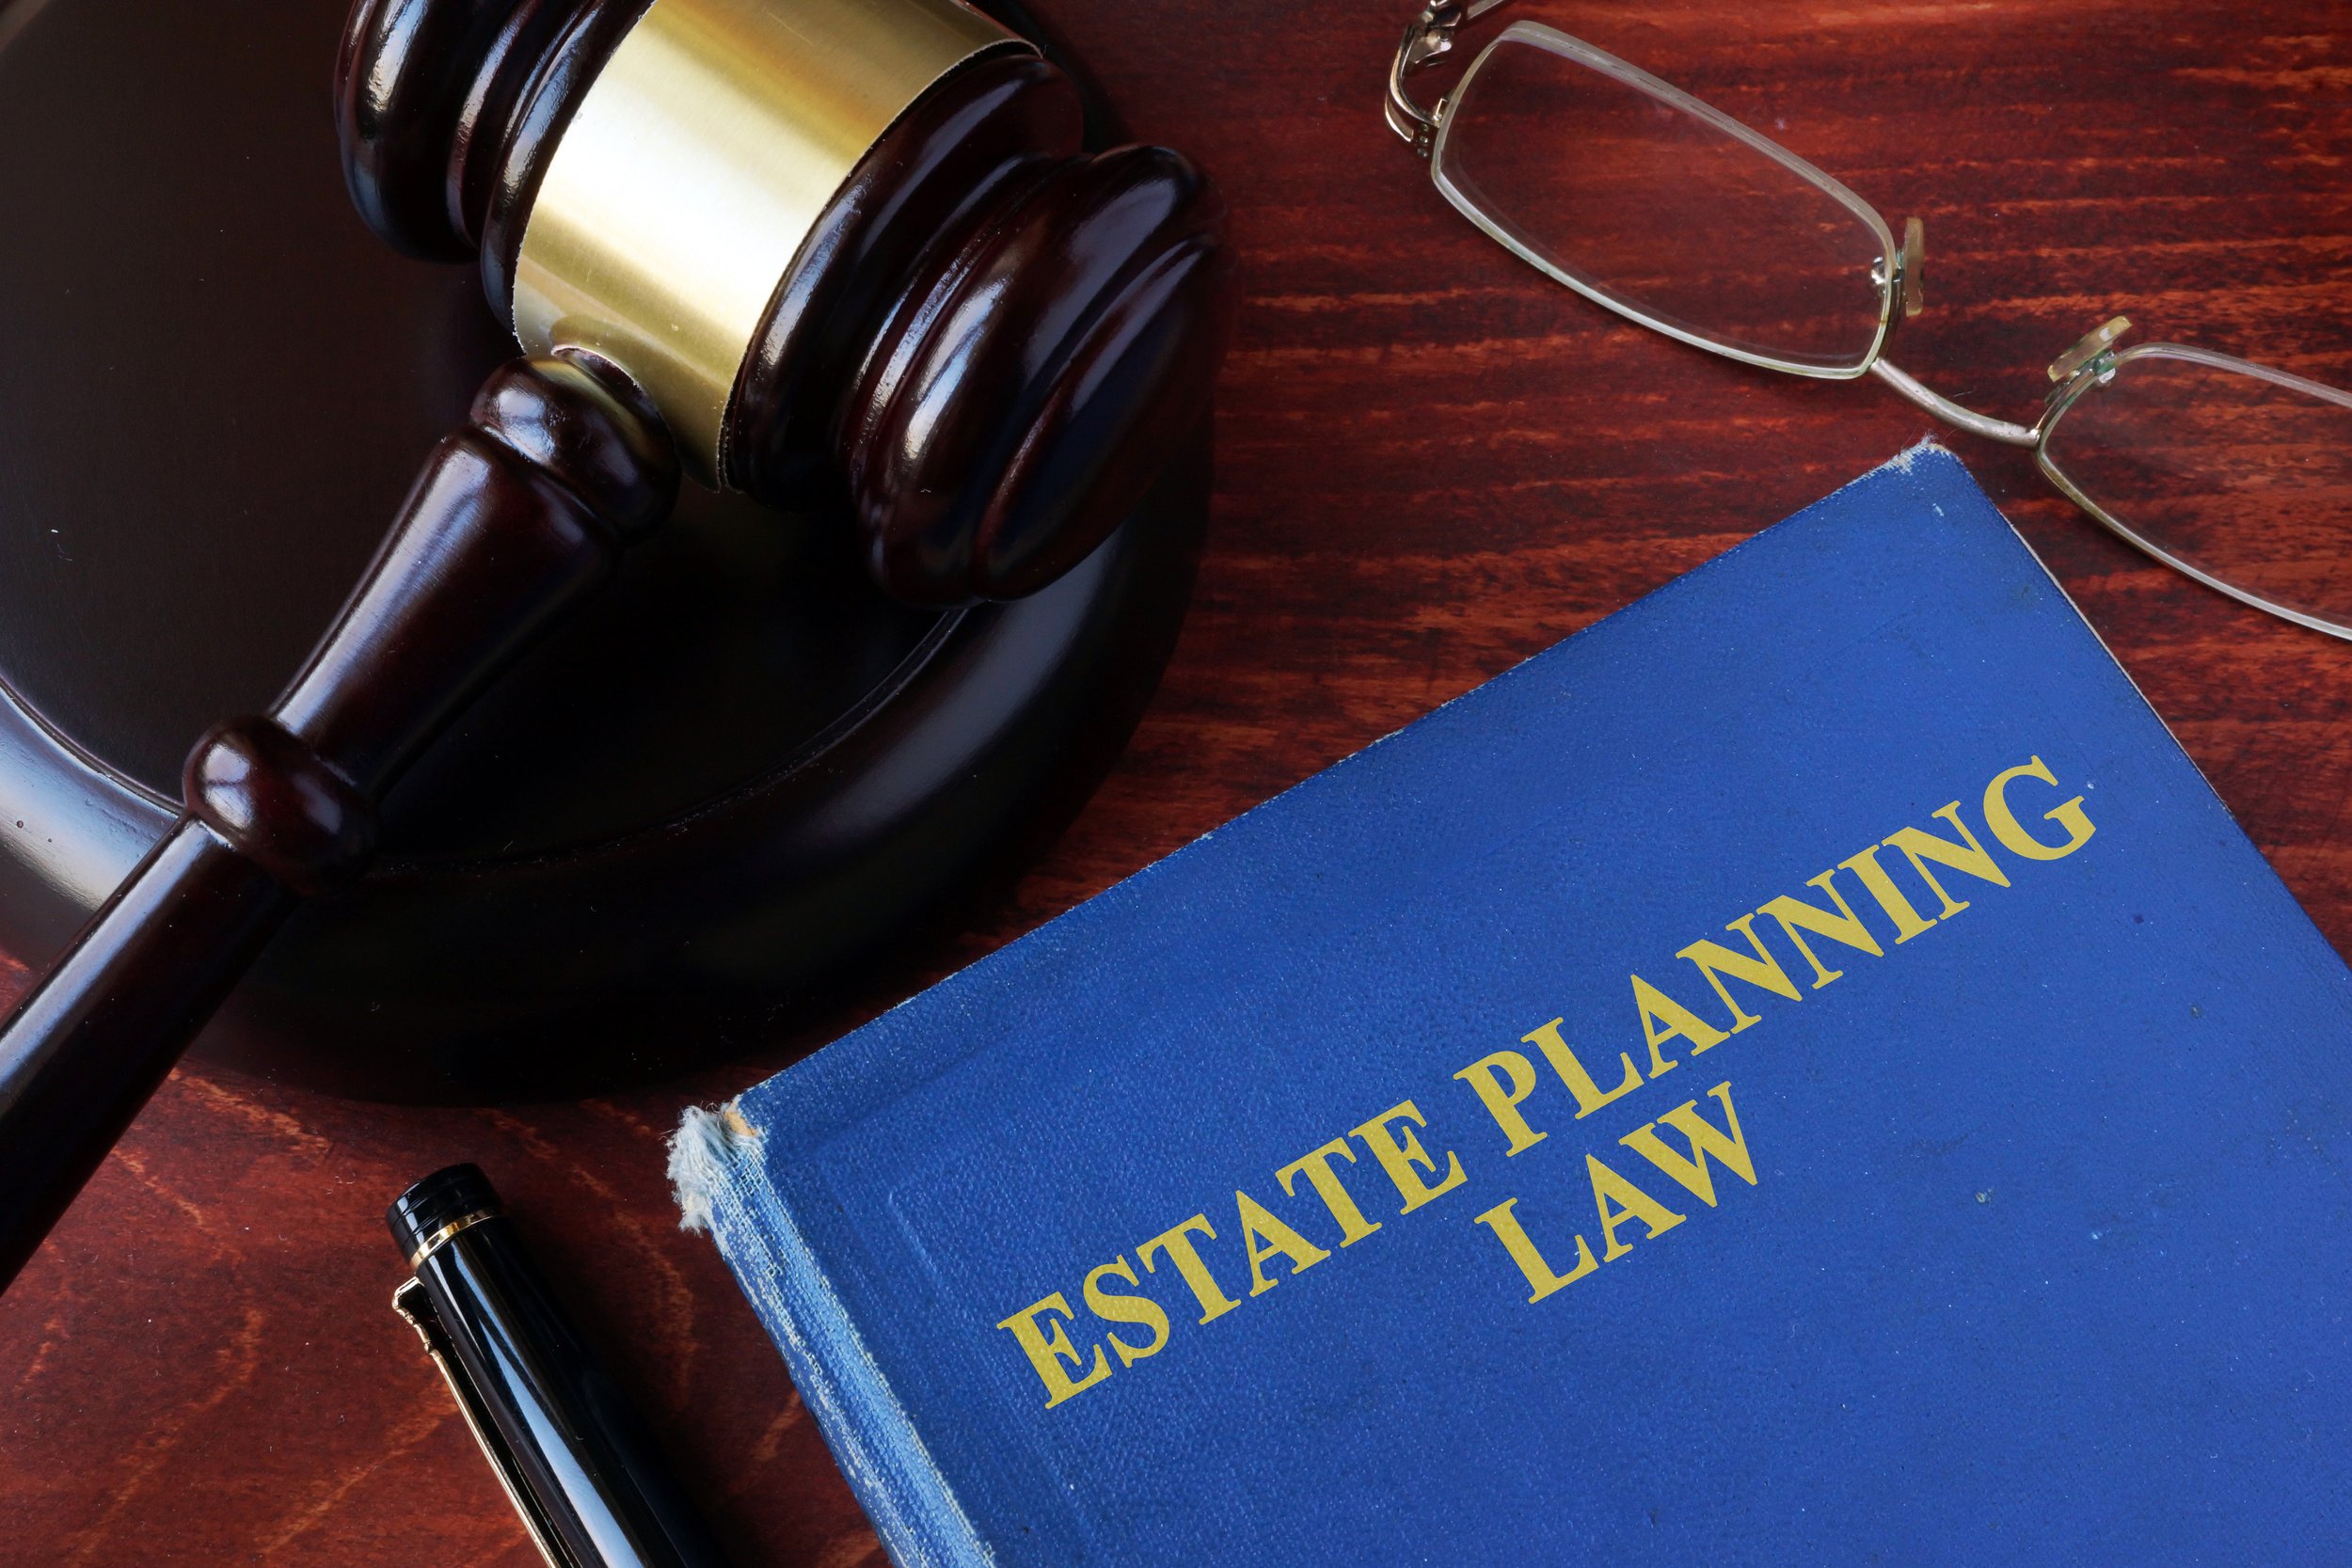 Book-with-title-estate-planning-law-and-a-gavel.-808817420_3869x2580.jpeg